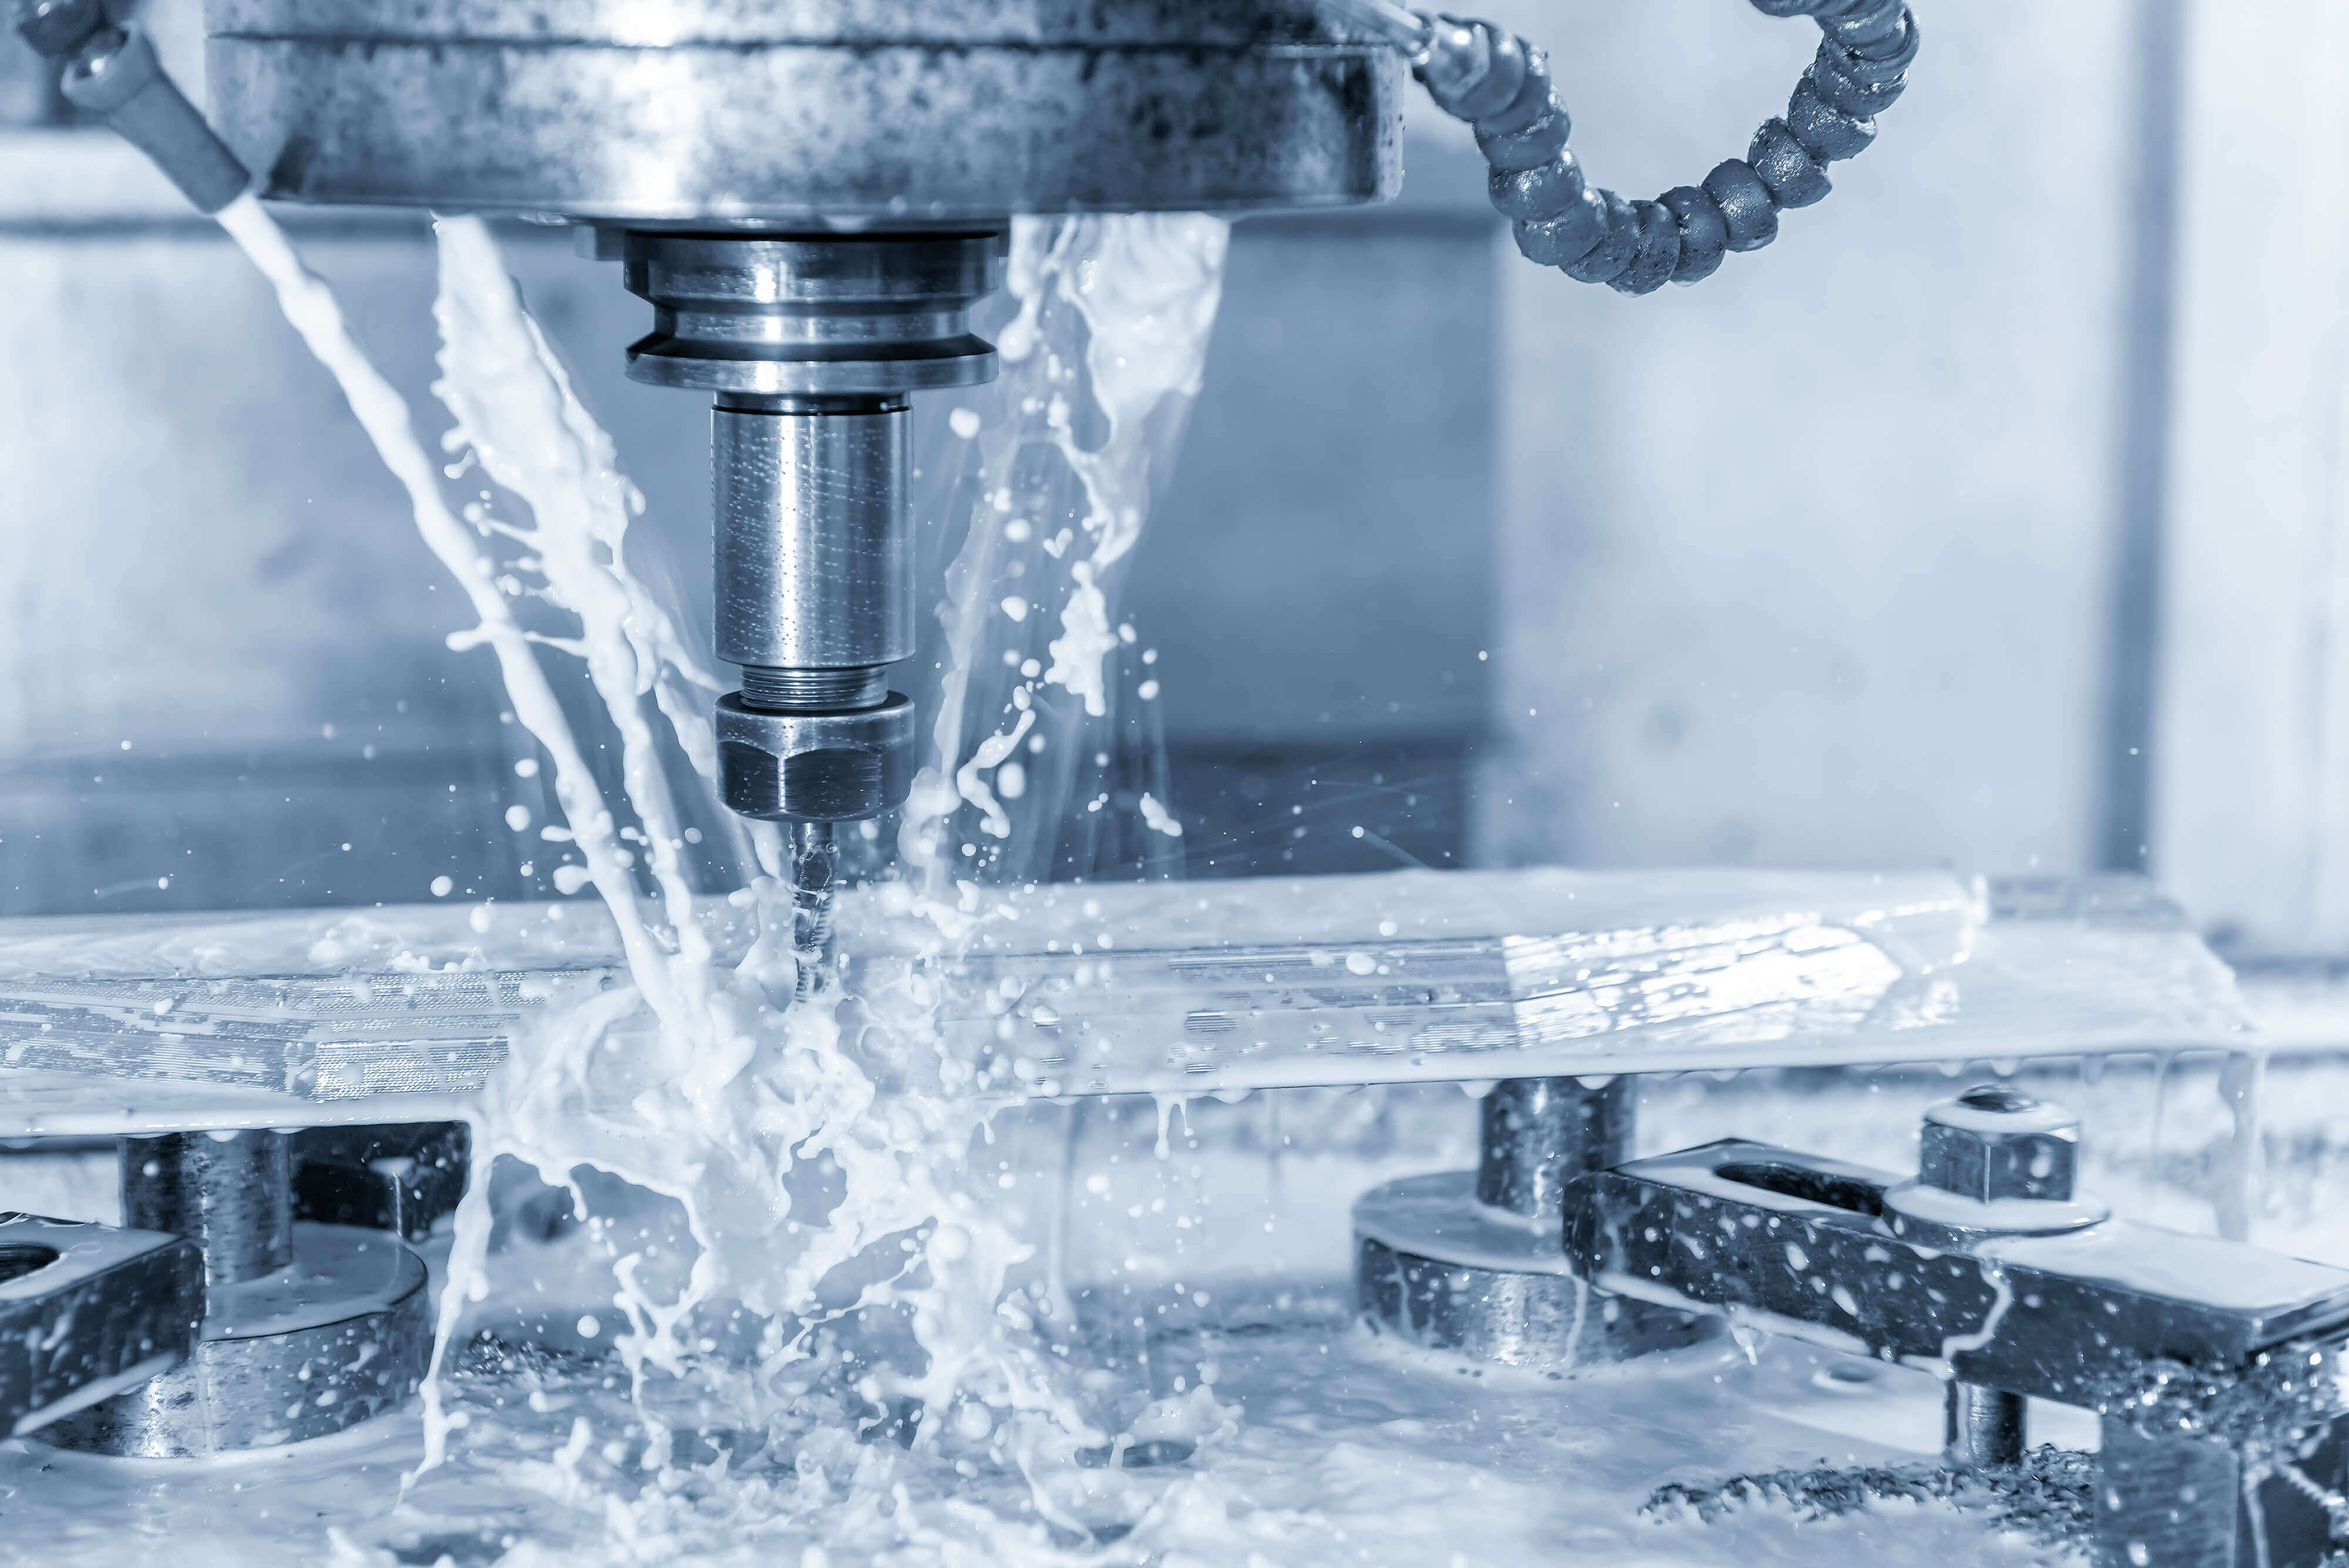 Learn How to Achieve True ROI in Your Machine Shop